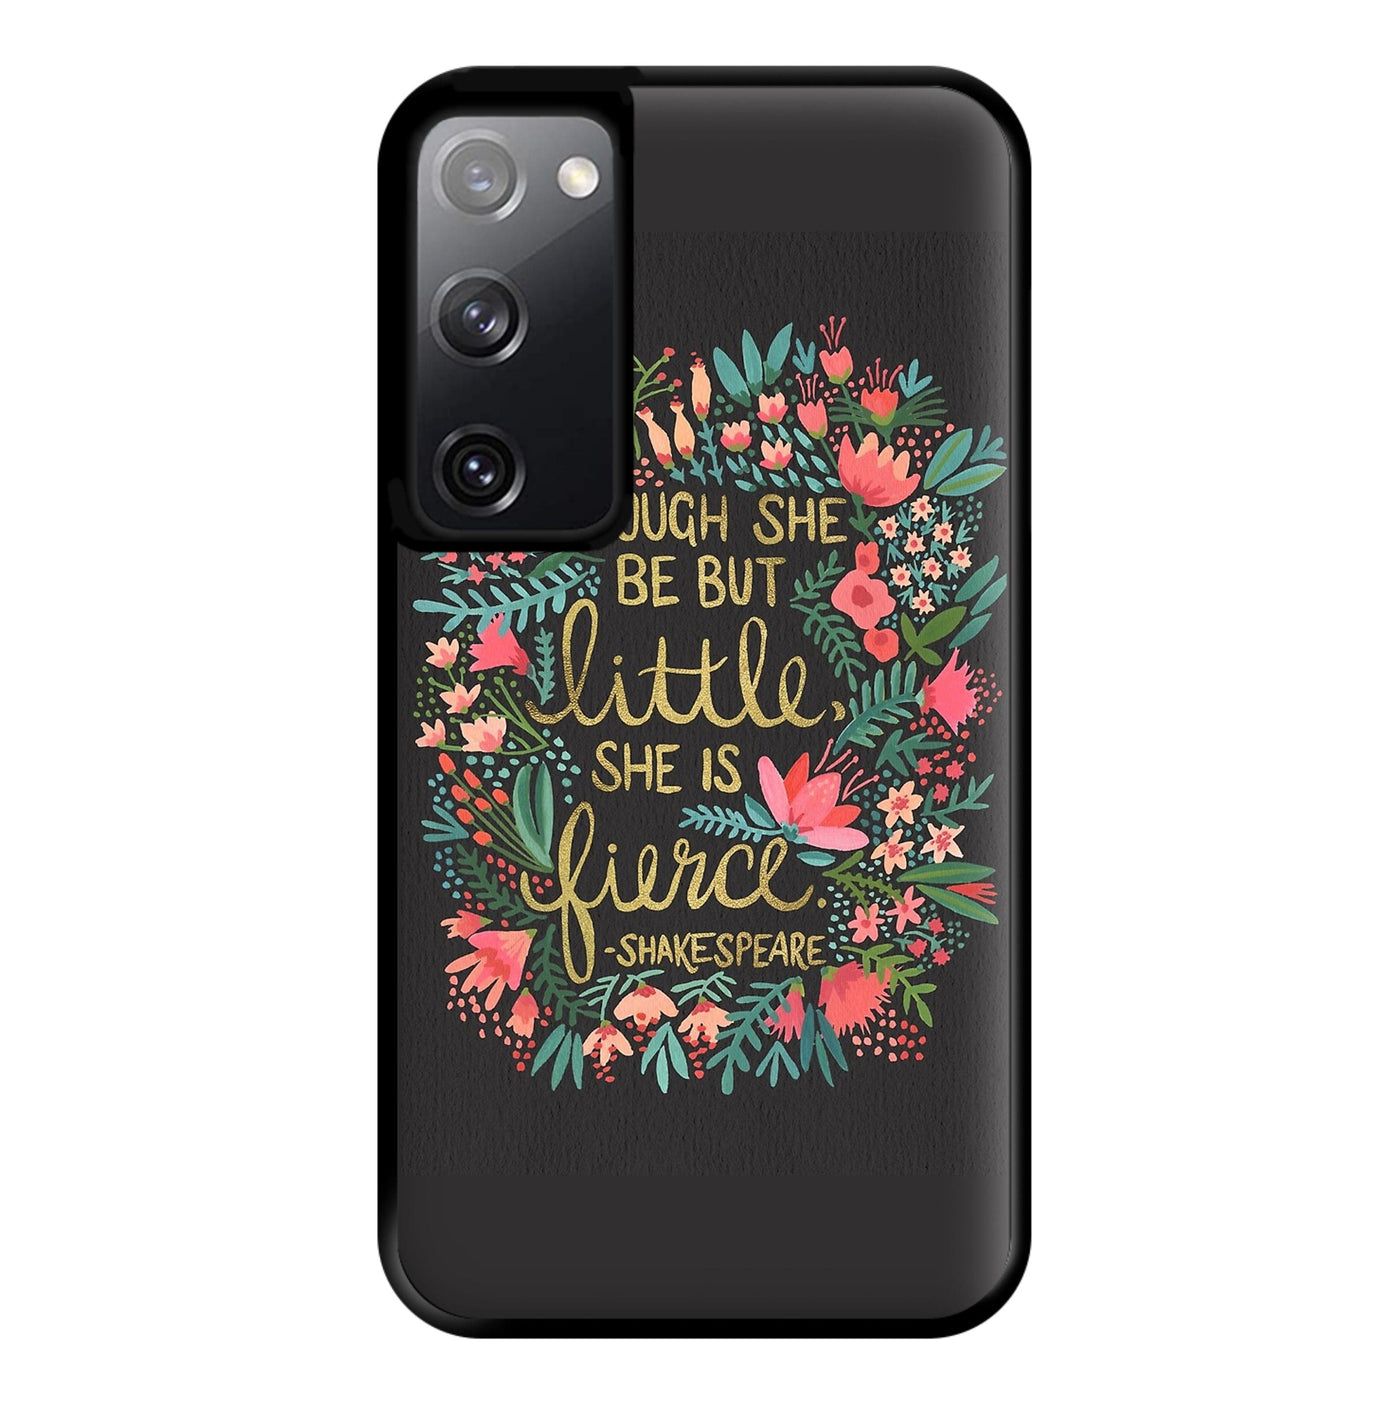 Though She Be But Little, She Is Fierce Phone Case